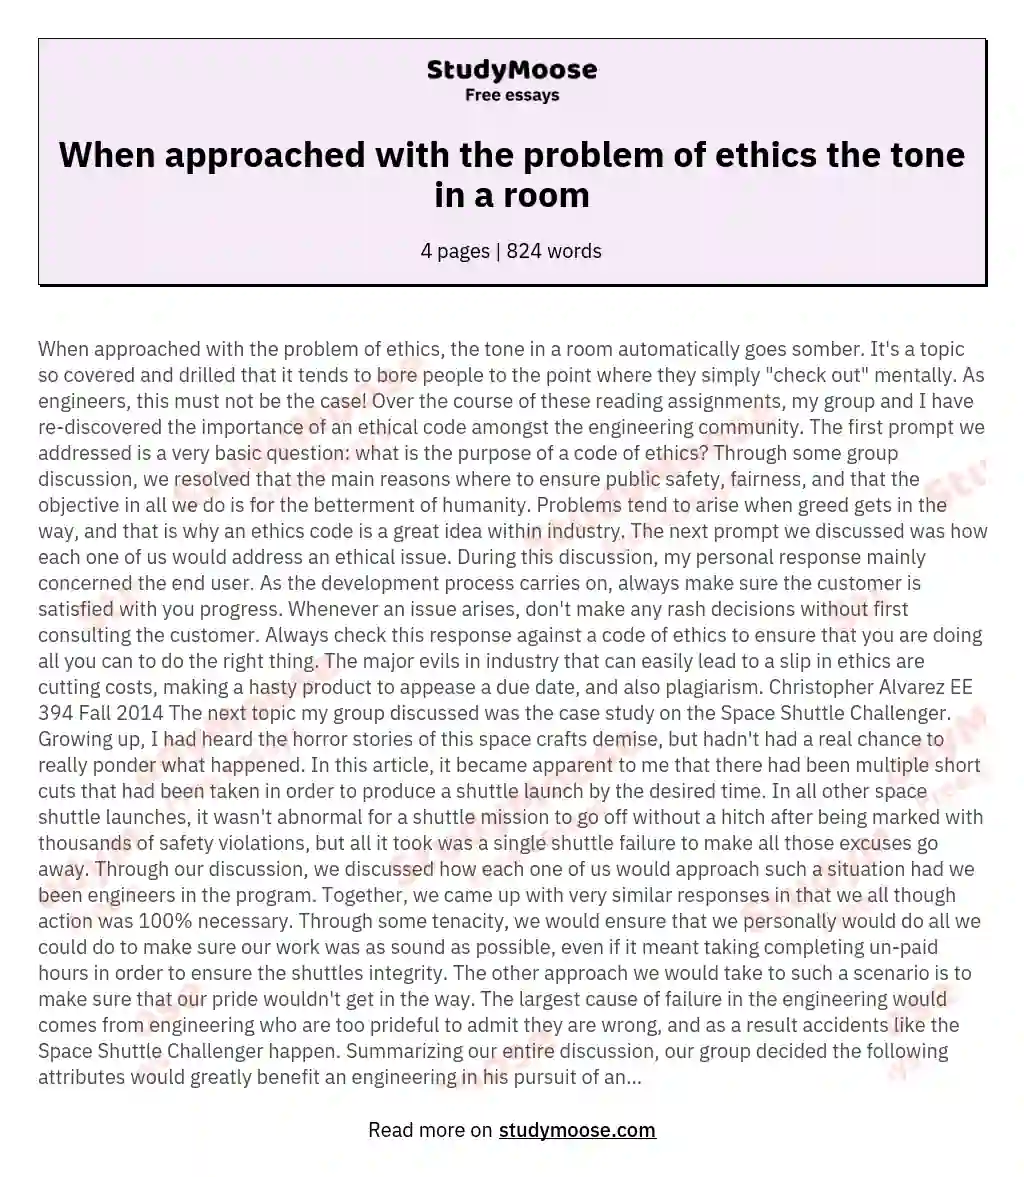 When approached with the problem of ethics the tone in a room essay